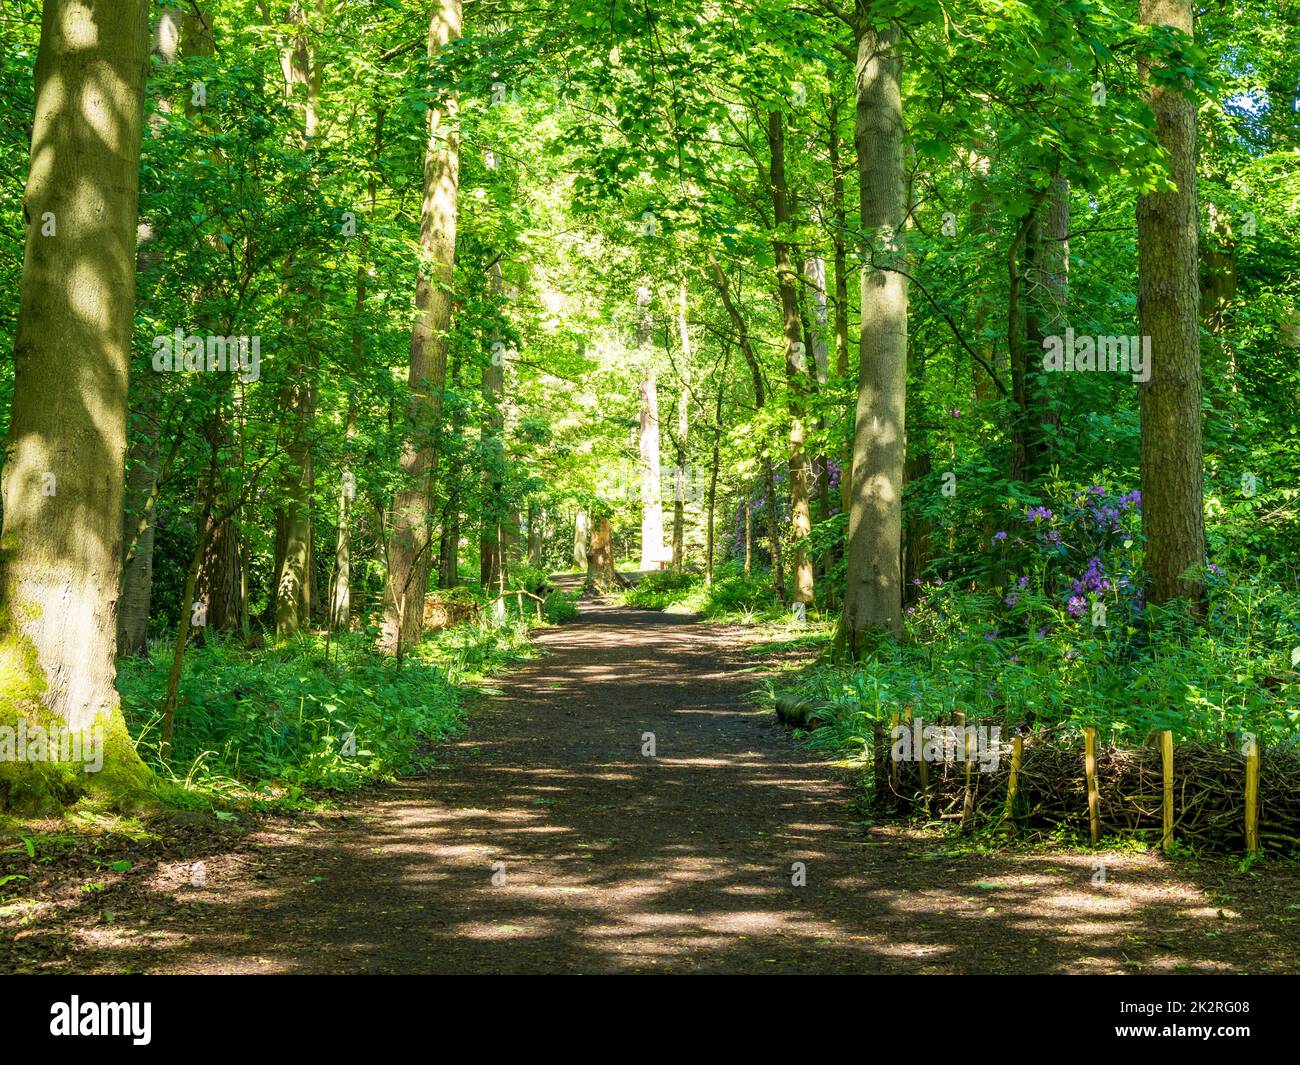 Country lane through green trees in spring sunlight Stock Photo